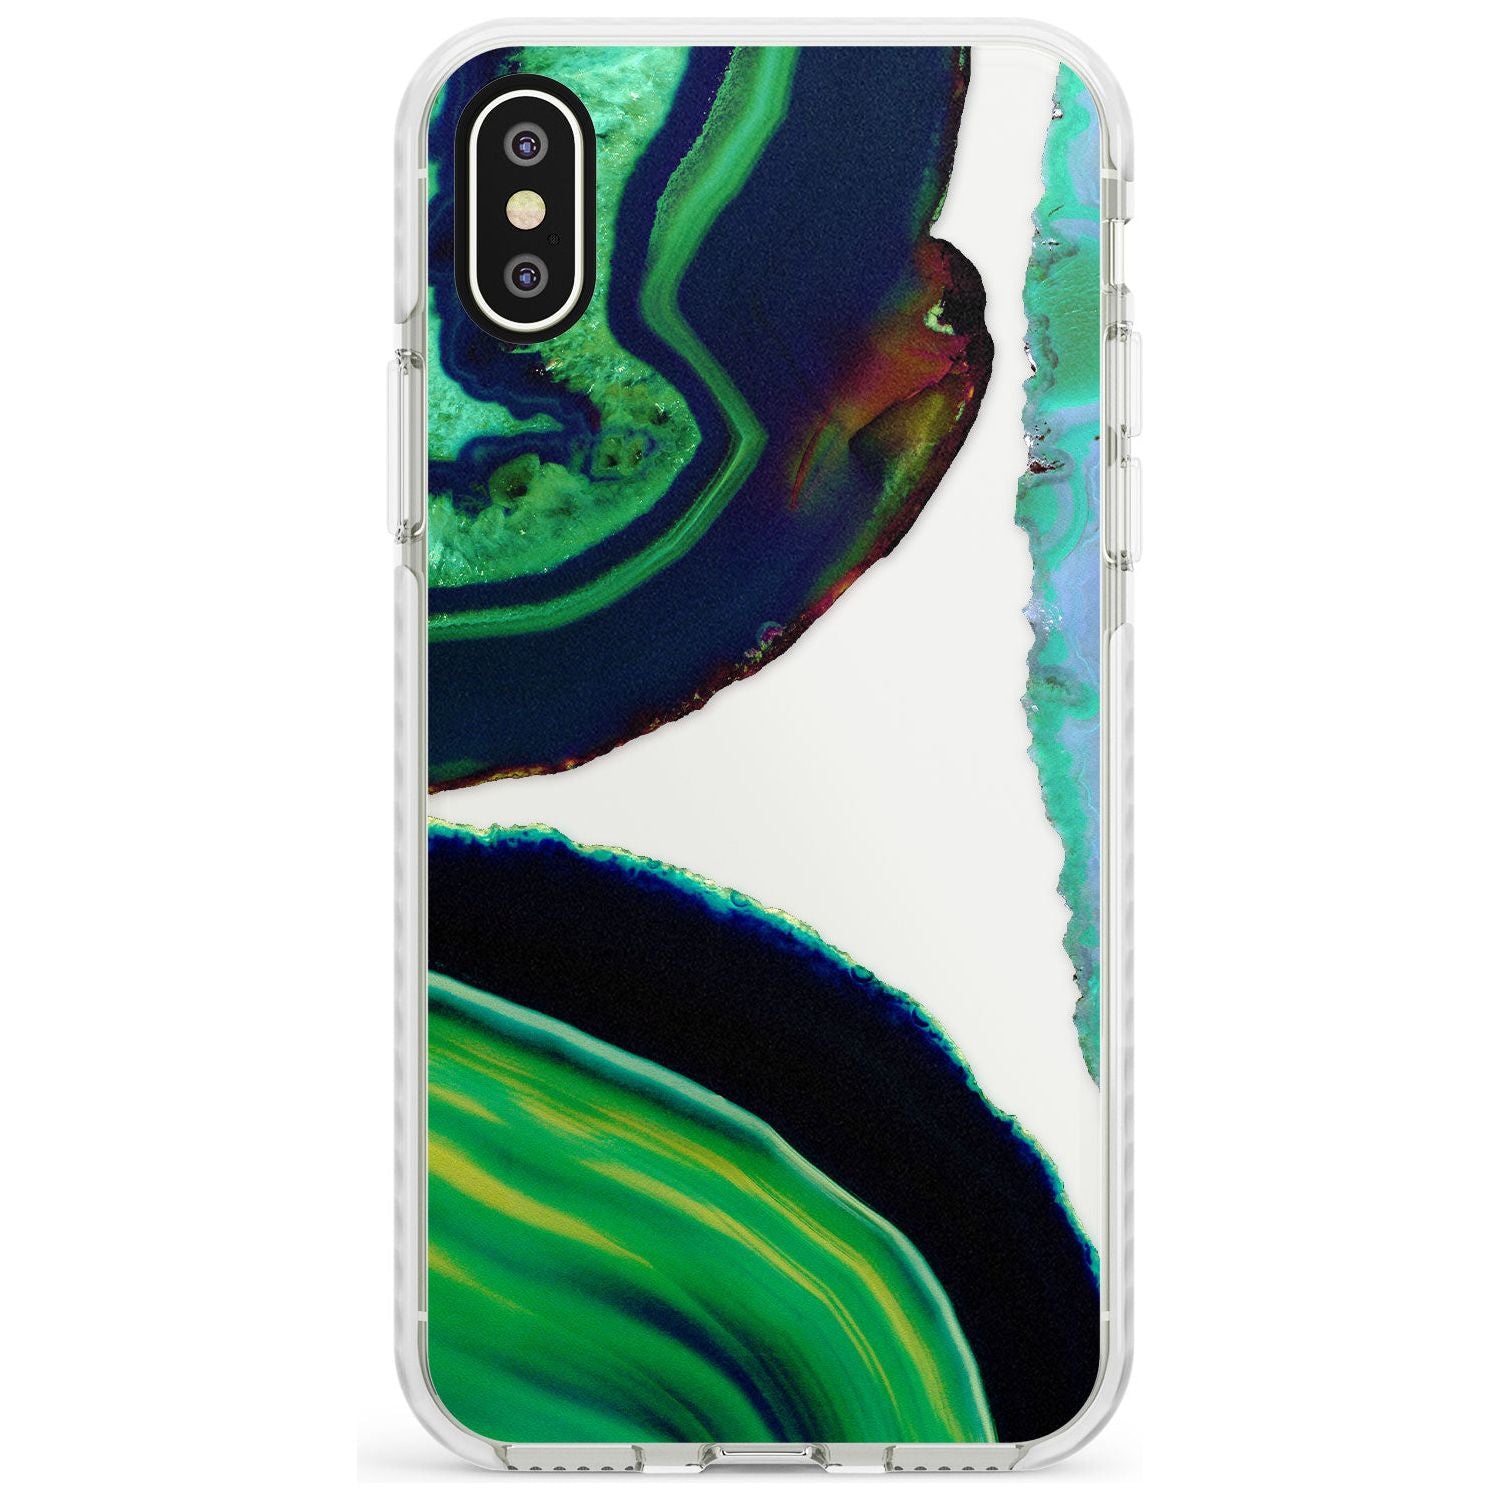 Green & Navy Gemstone Crystal Clear Design Impact Phone Case for iPhone X XS Max XR